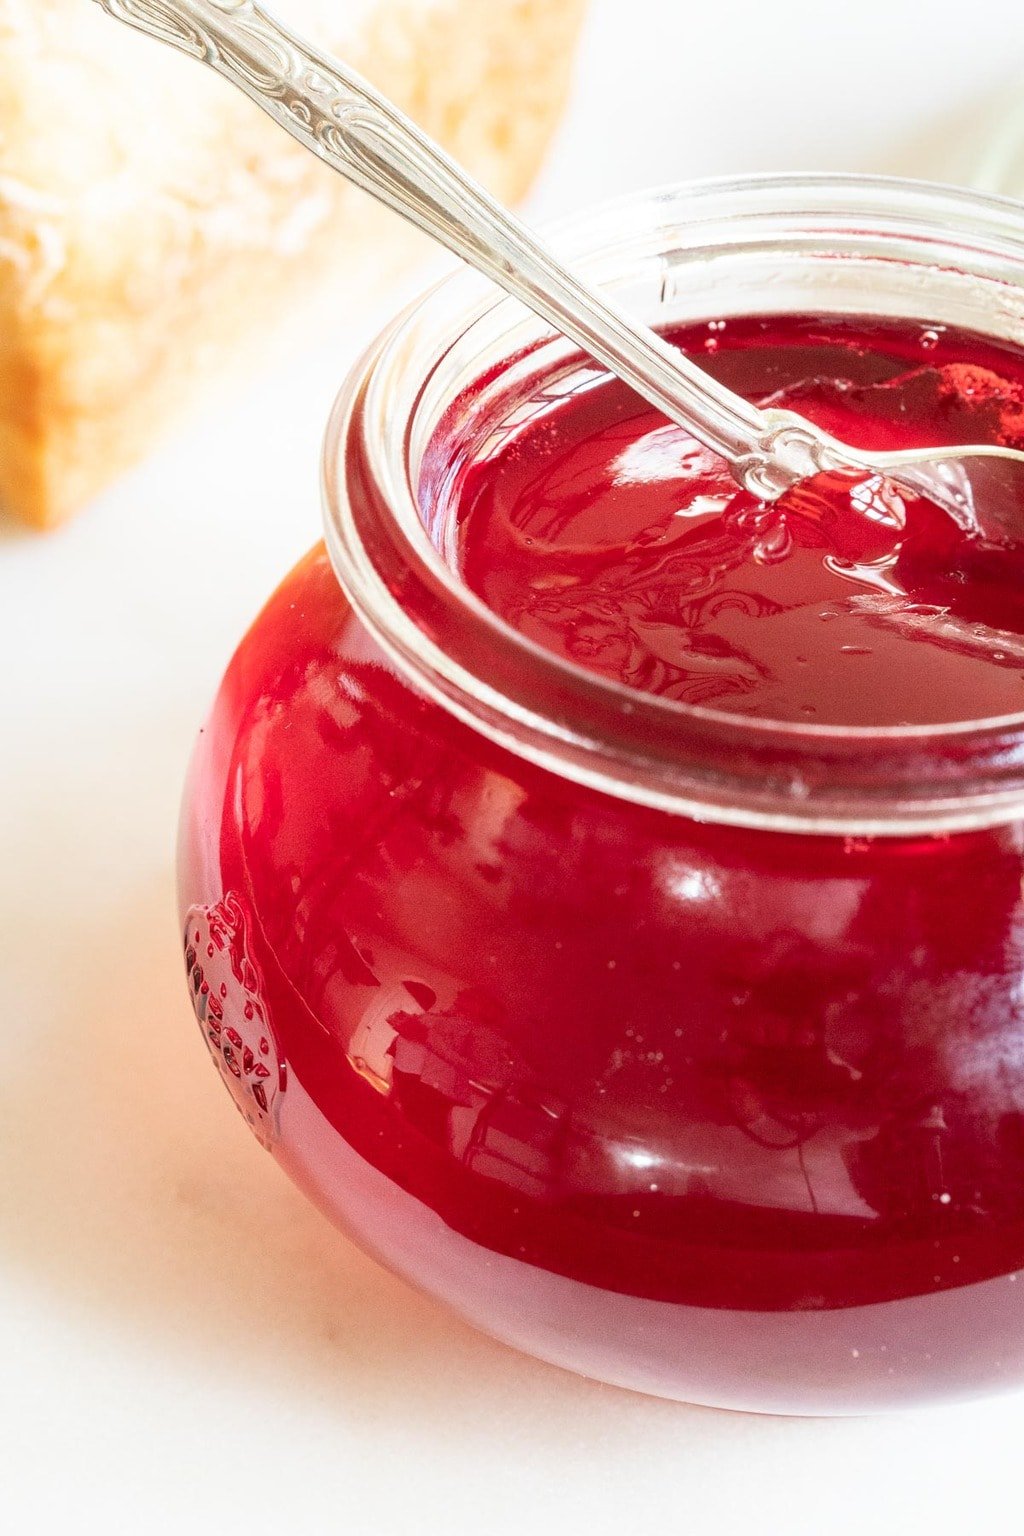 Closeup vertical photo of a Weck glass canning jar filled with Easy Blackberry Jelly.